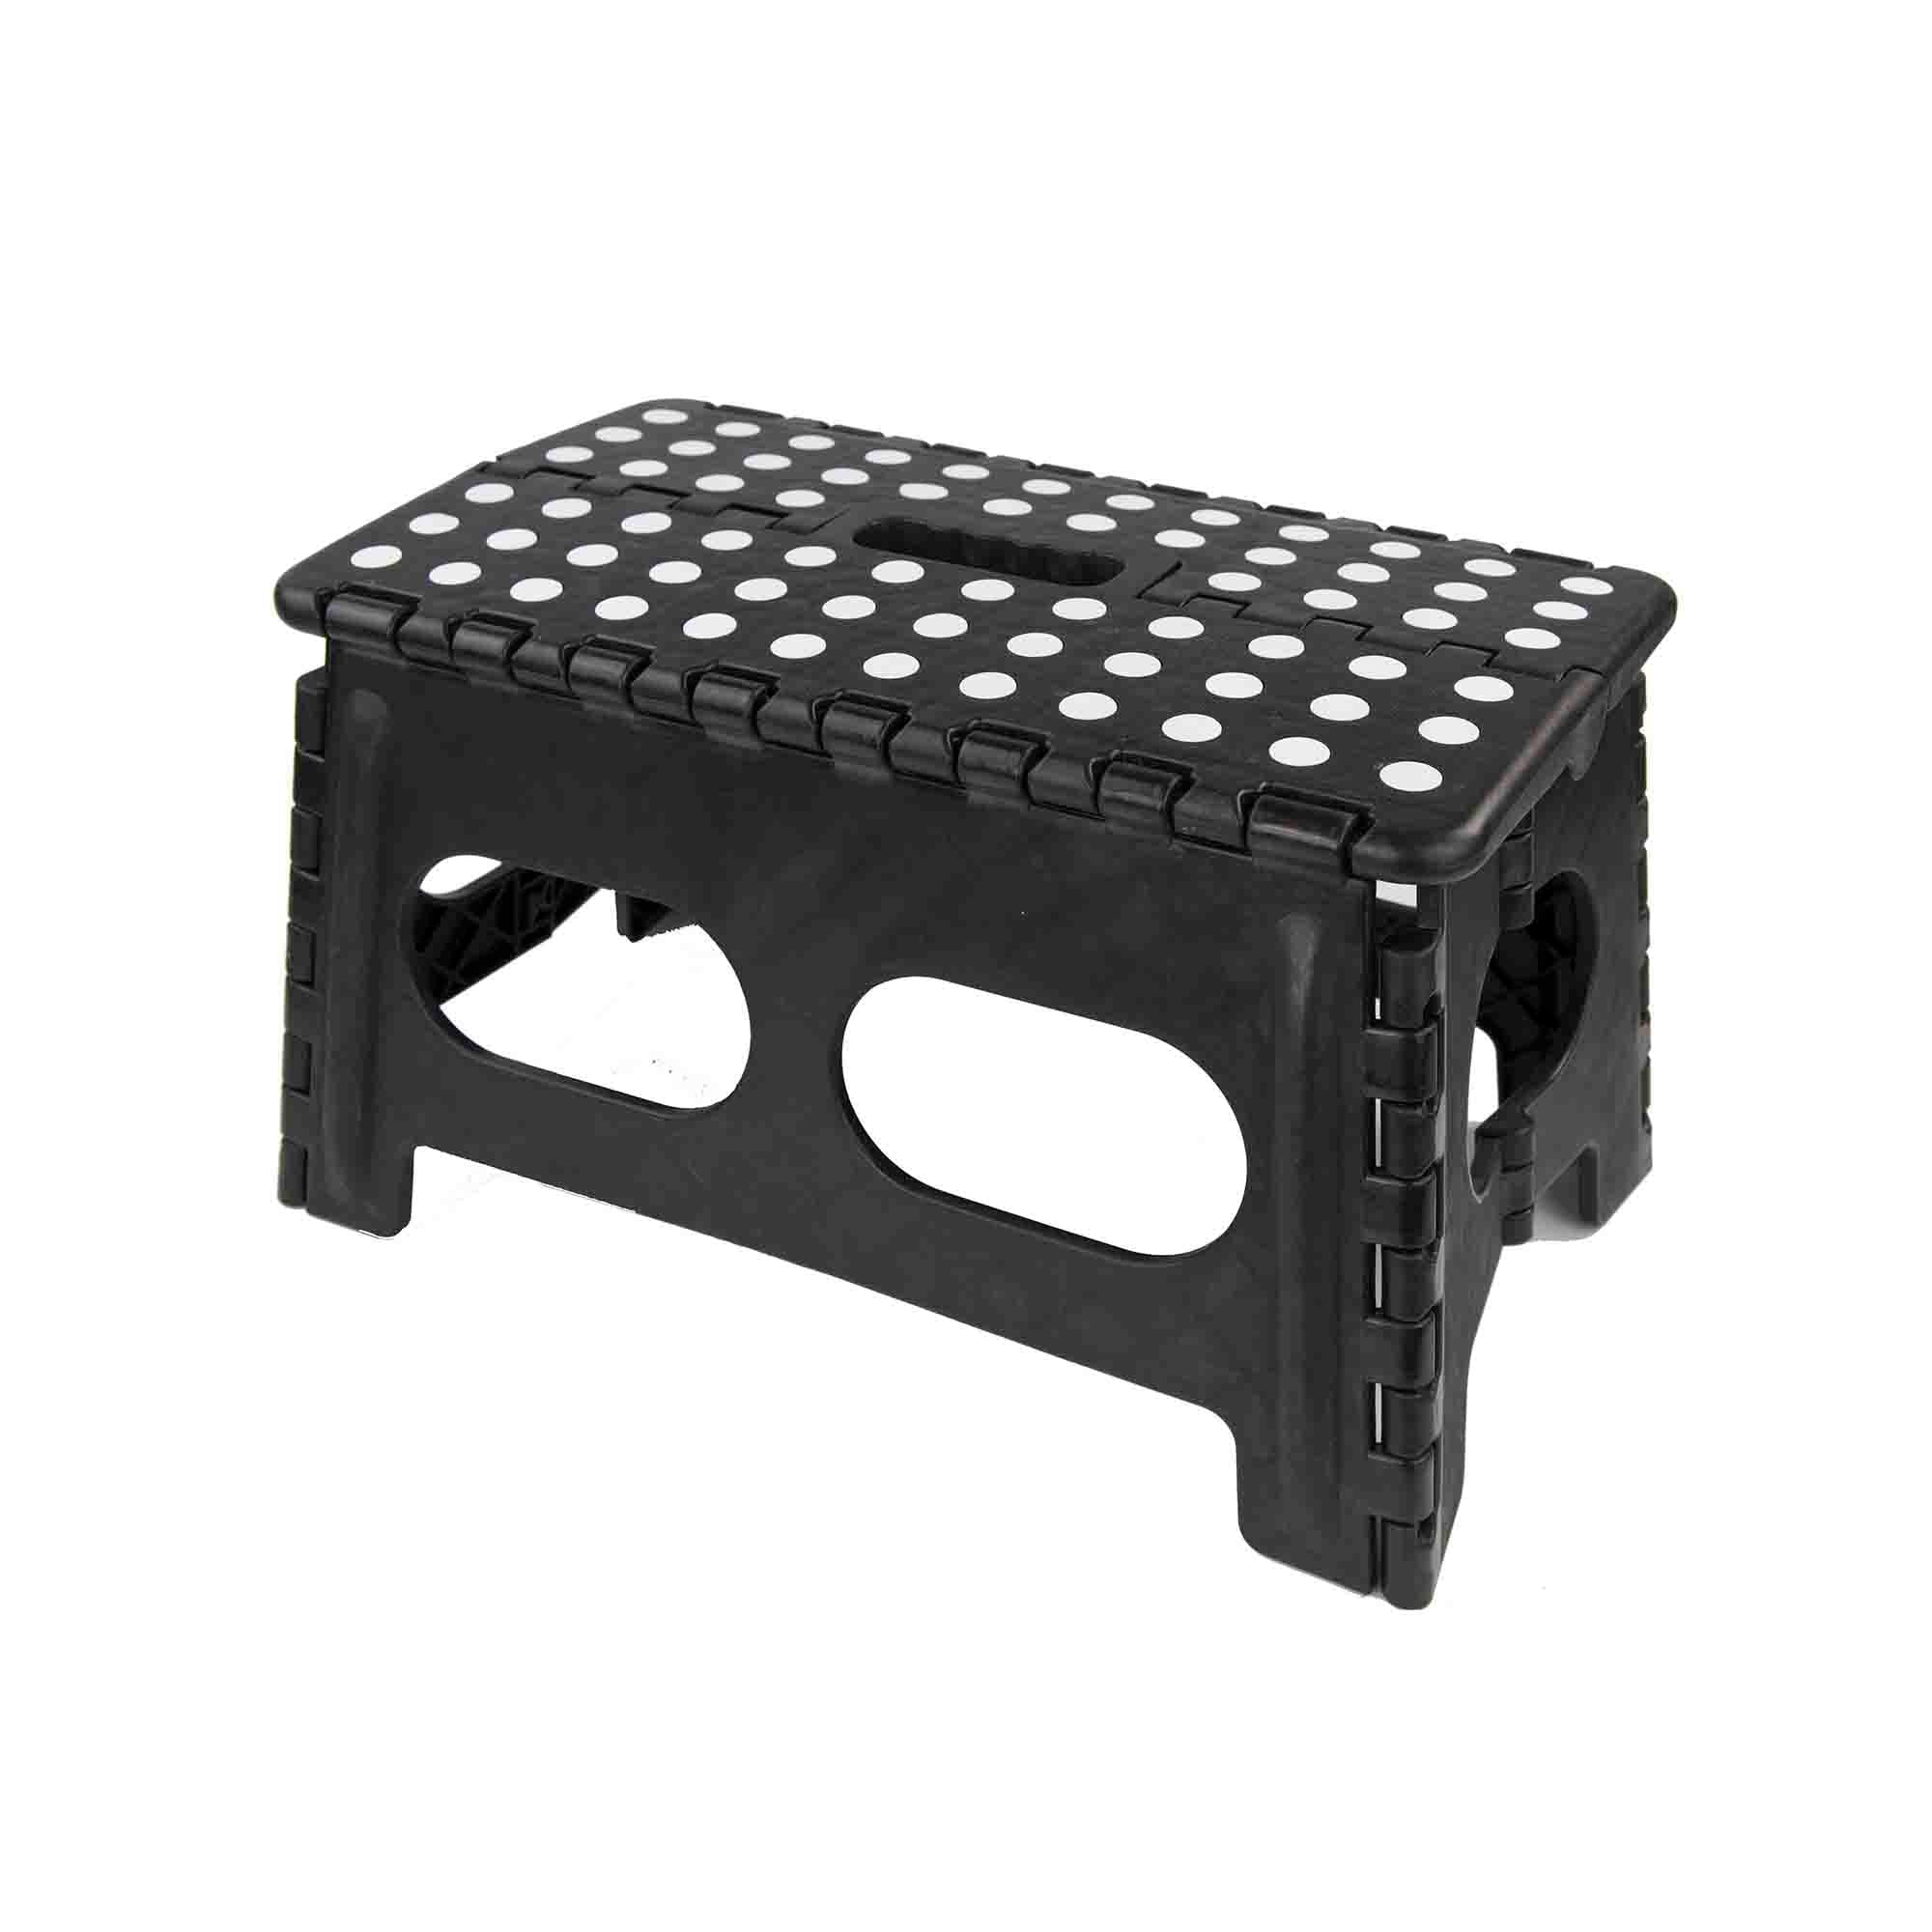 Home Basics Folding Stool with Non Slip Grip Dots and Carrying Handle, Black $10.00 EACH, CASE PACK OF 12